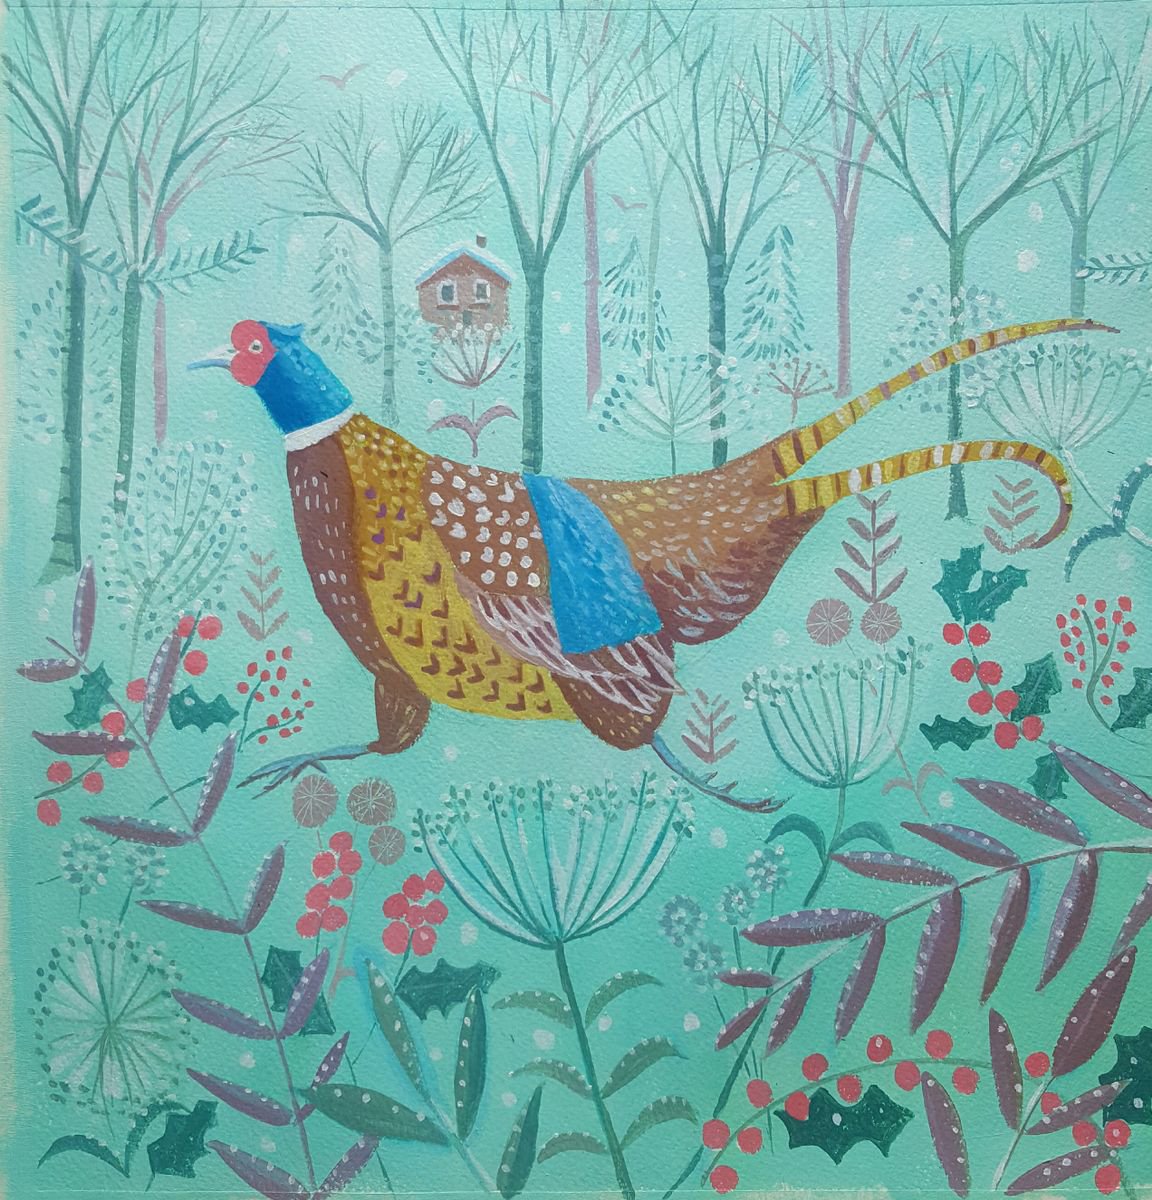 Pheasant in winter by Mary Stubberfield